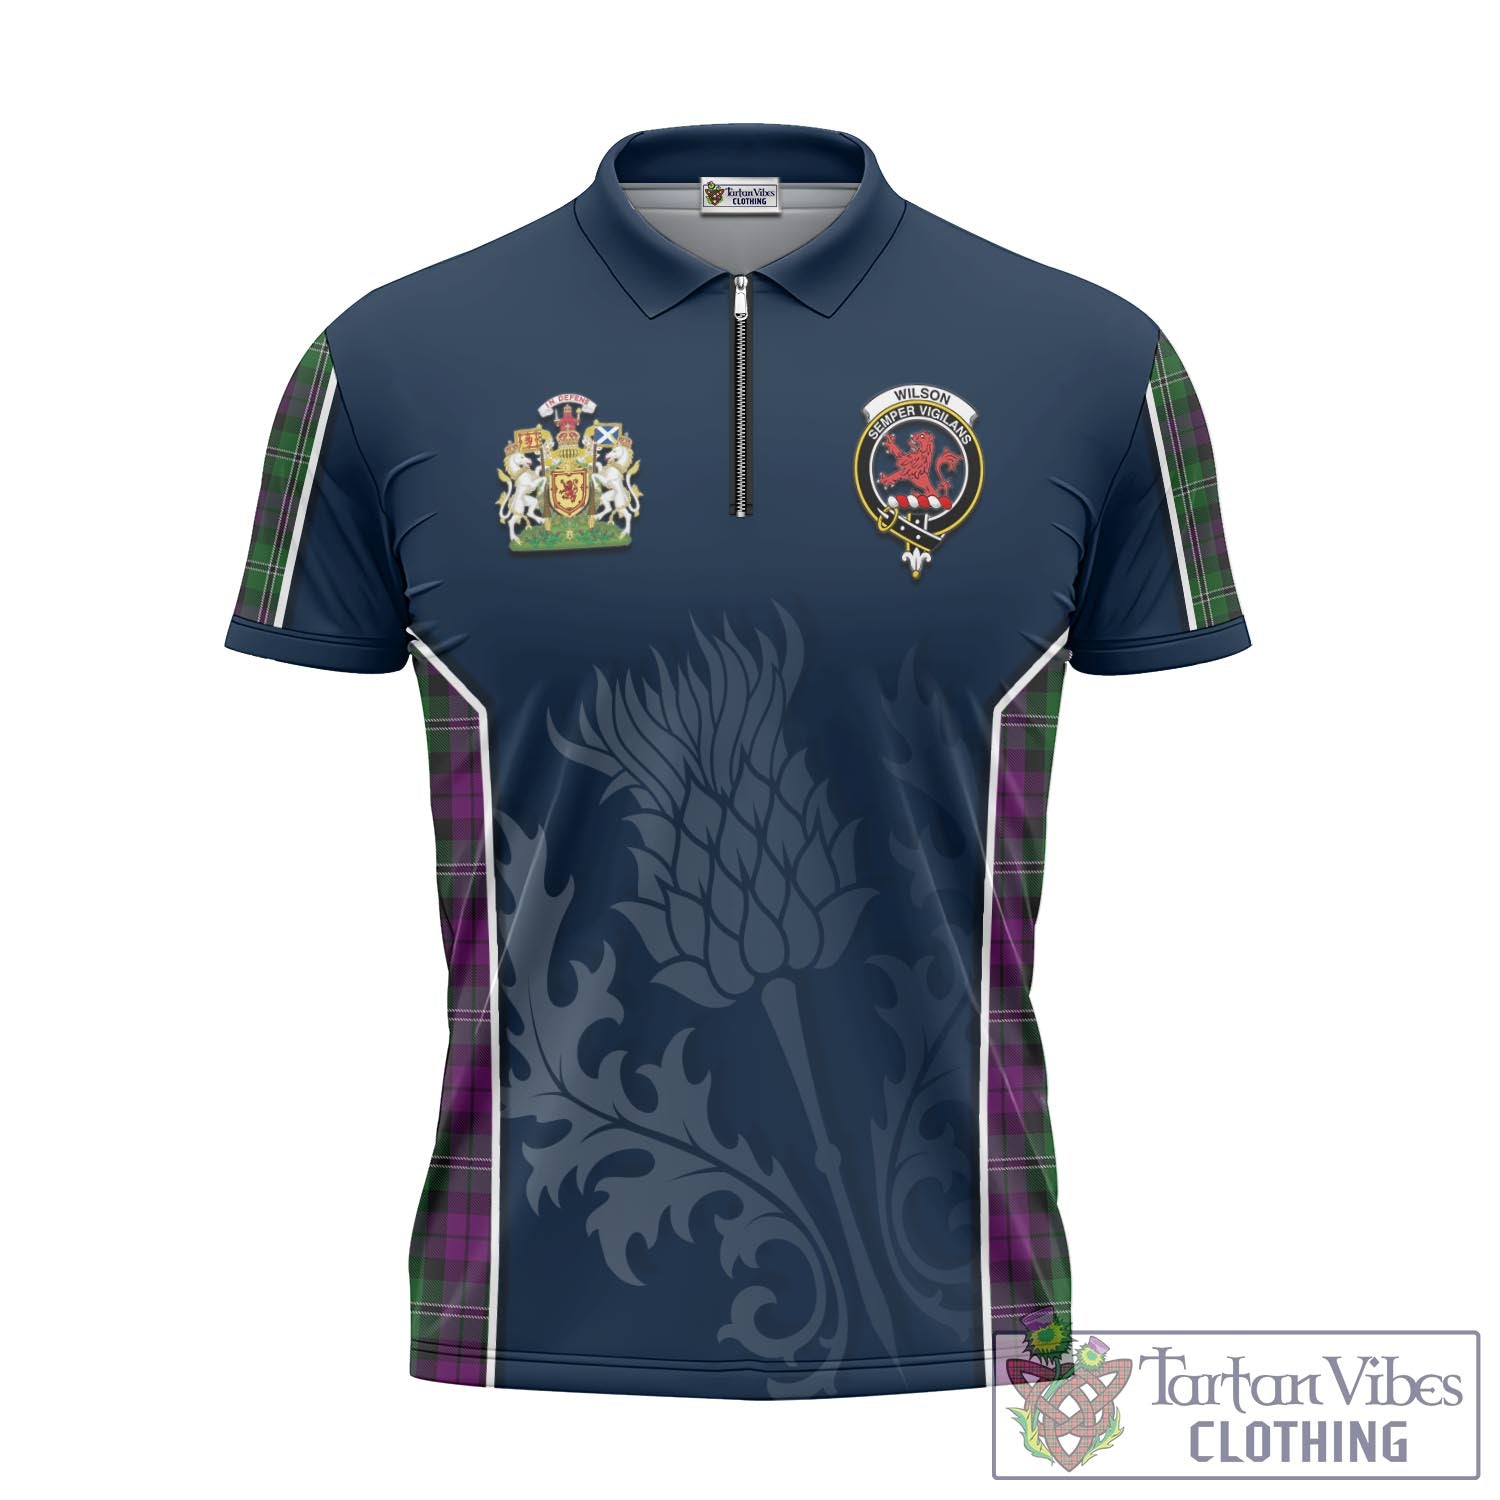 Tartan Vibes Clothing Wilson Tartan Zipper Polo Shirt with Family Crest and Scottish Thistle Vibes Sport Style